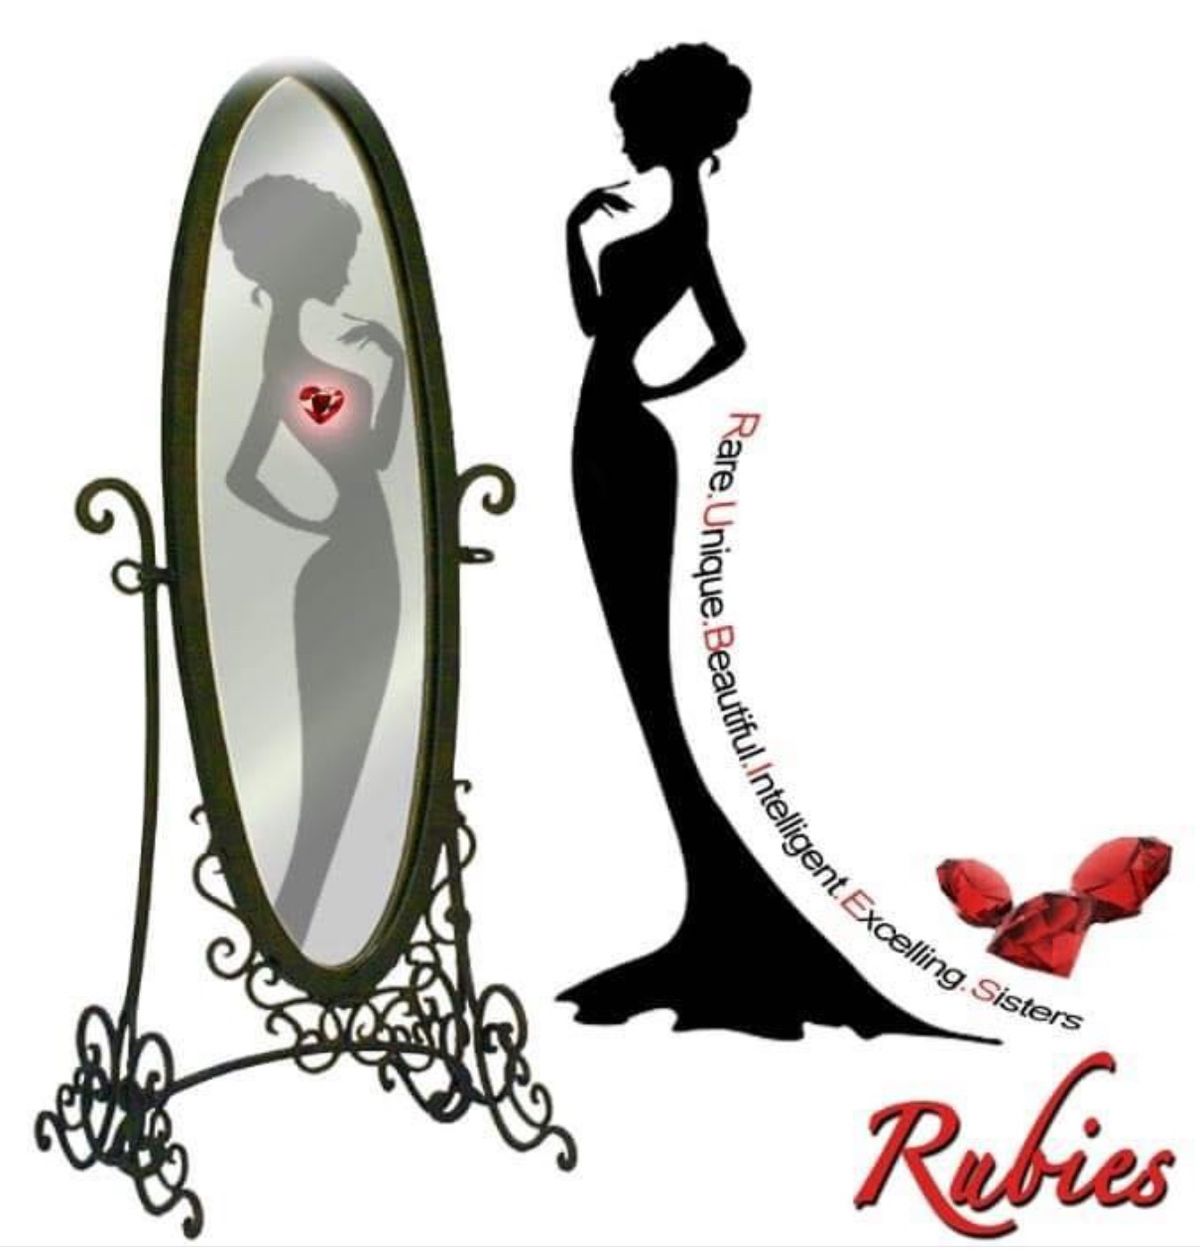 Rubies Annual Fundraiser \u201cRebuilding with the broken pieces 